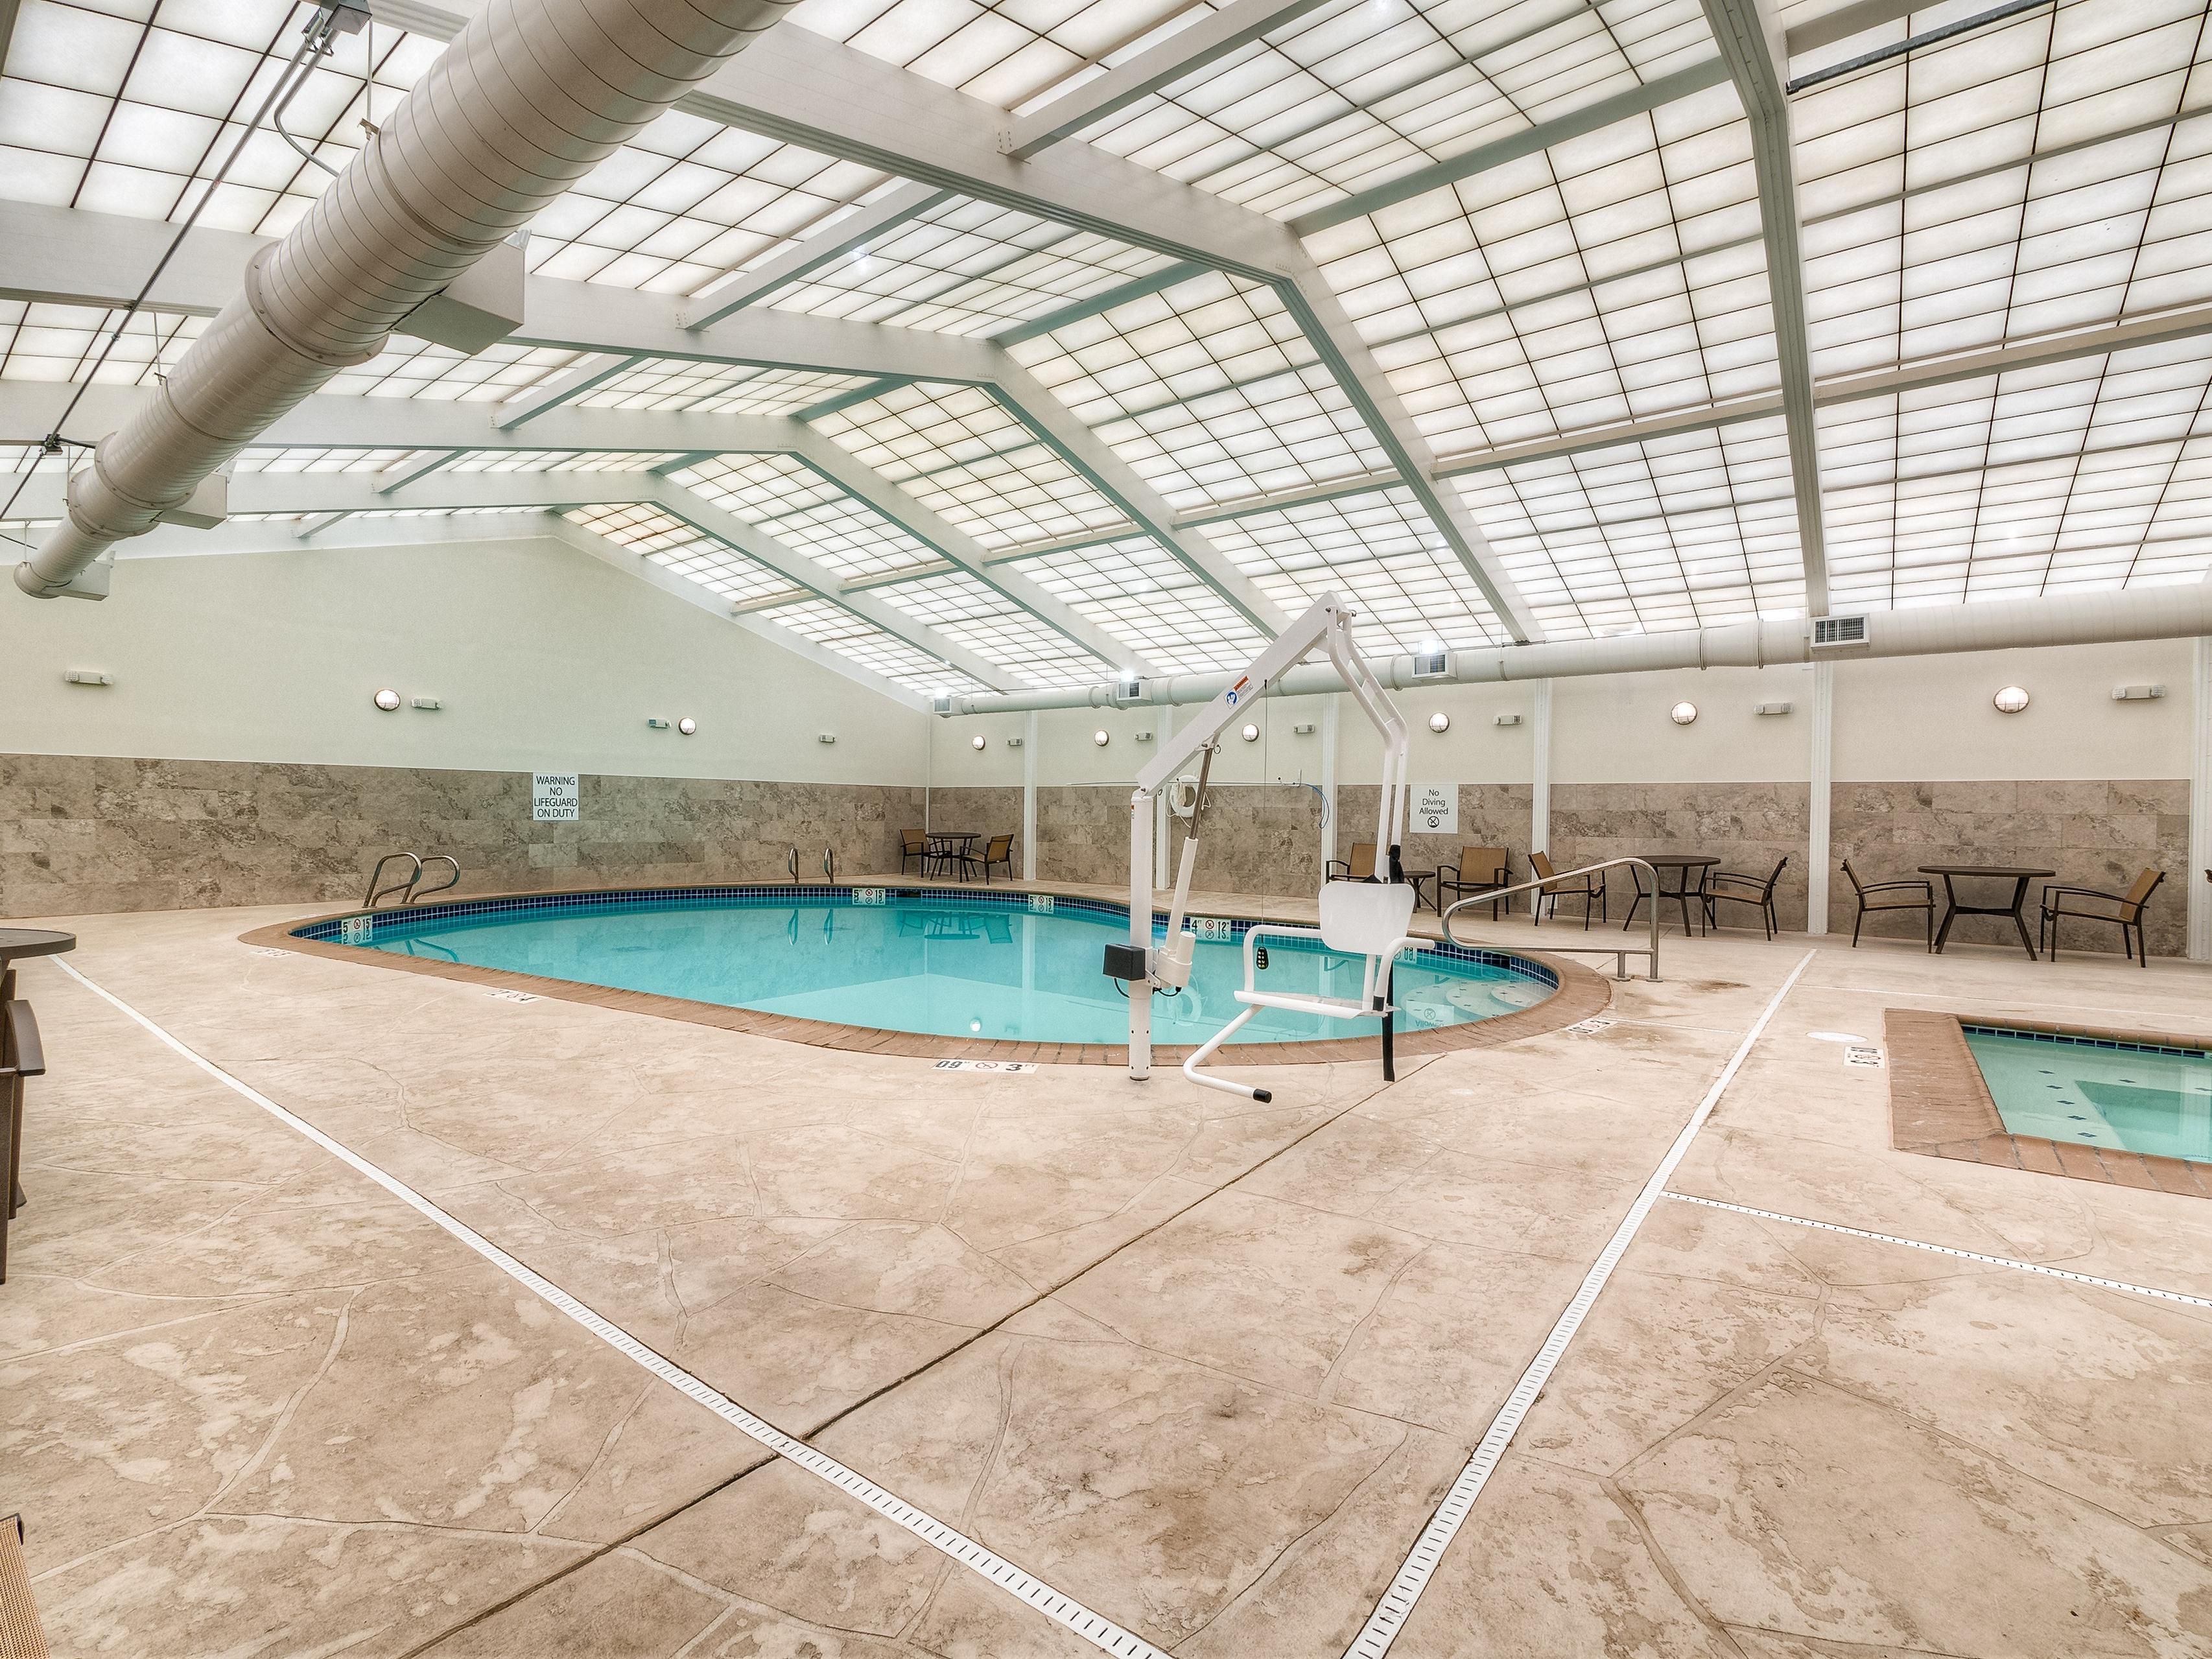 We have the Largest Indoor Pool in Tacoma featuring an Atrium Roof for Natural Sunlight. All Ages will enjoy our spacious, modern and inviting pool and hot tub area.